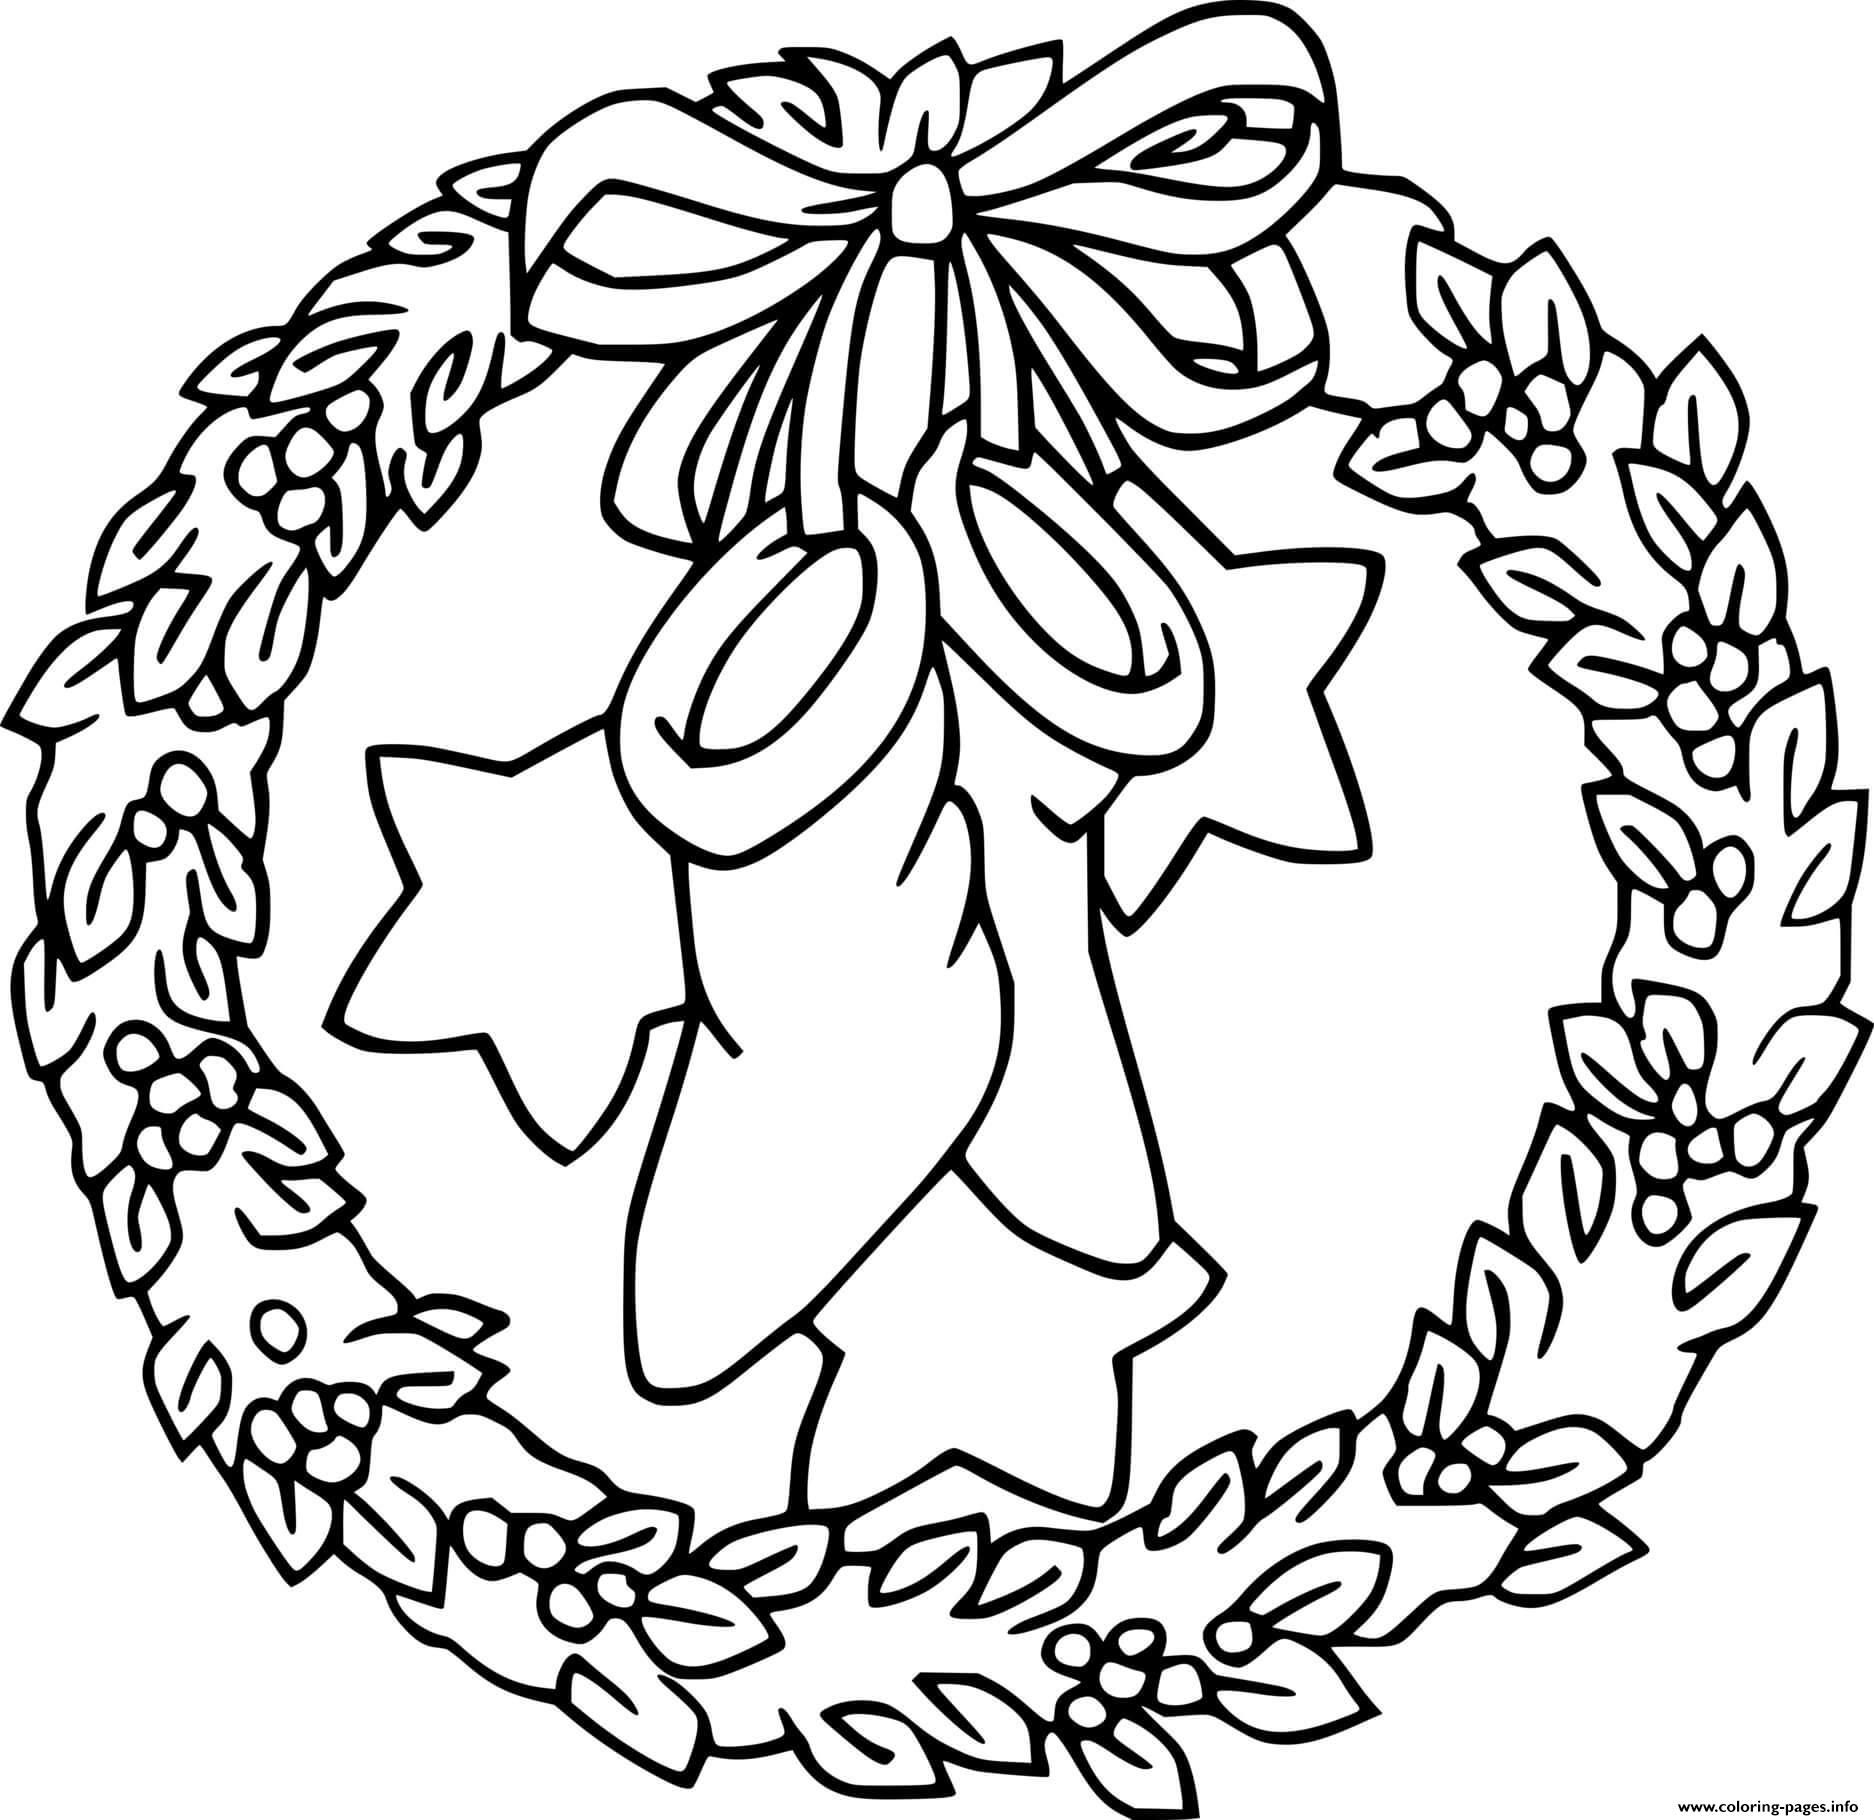 Christmas Wreath With Stockings coloring